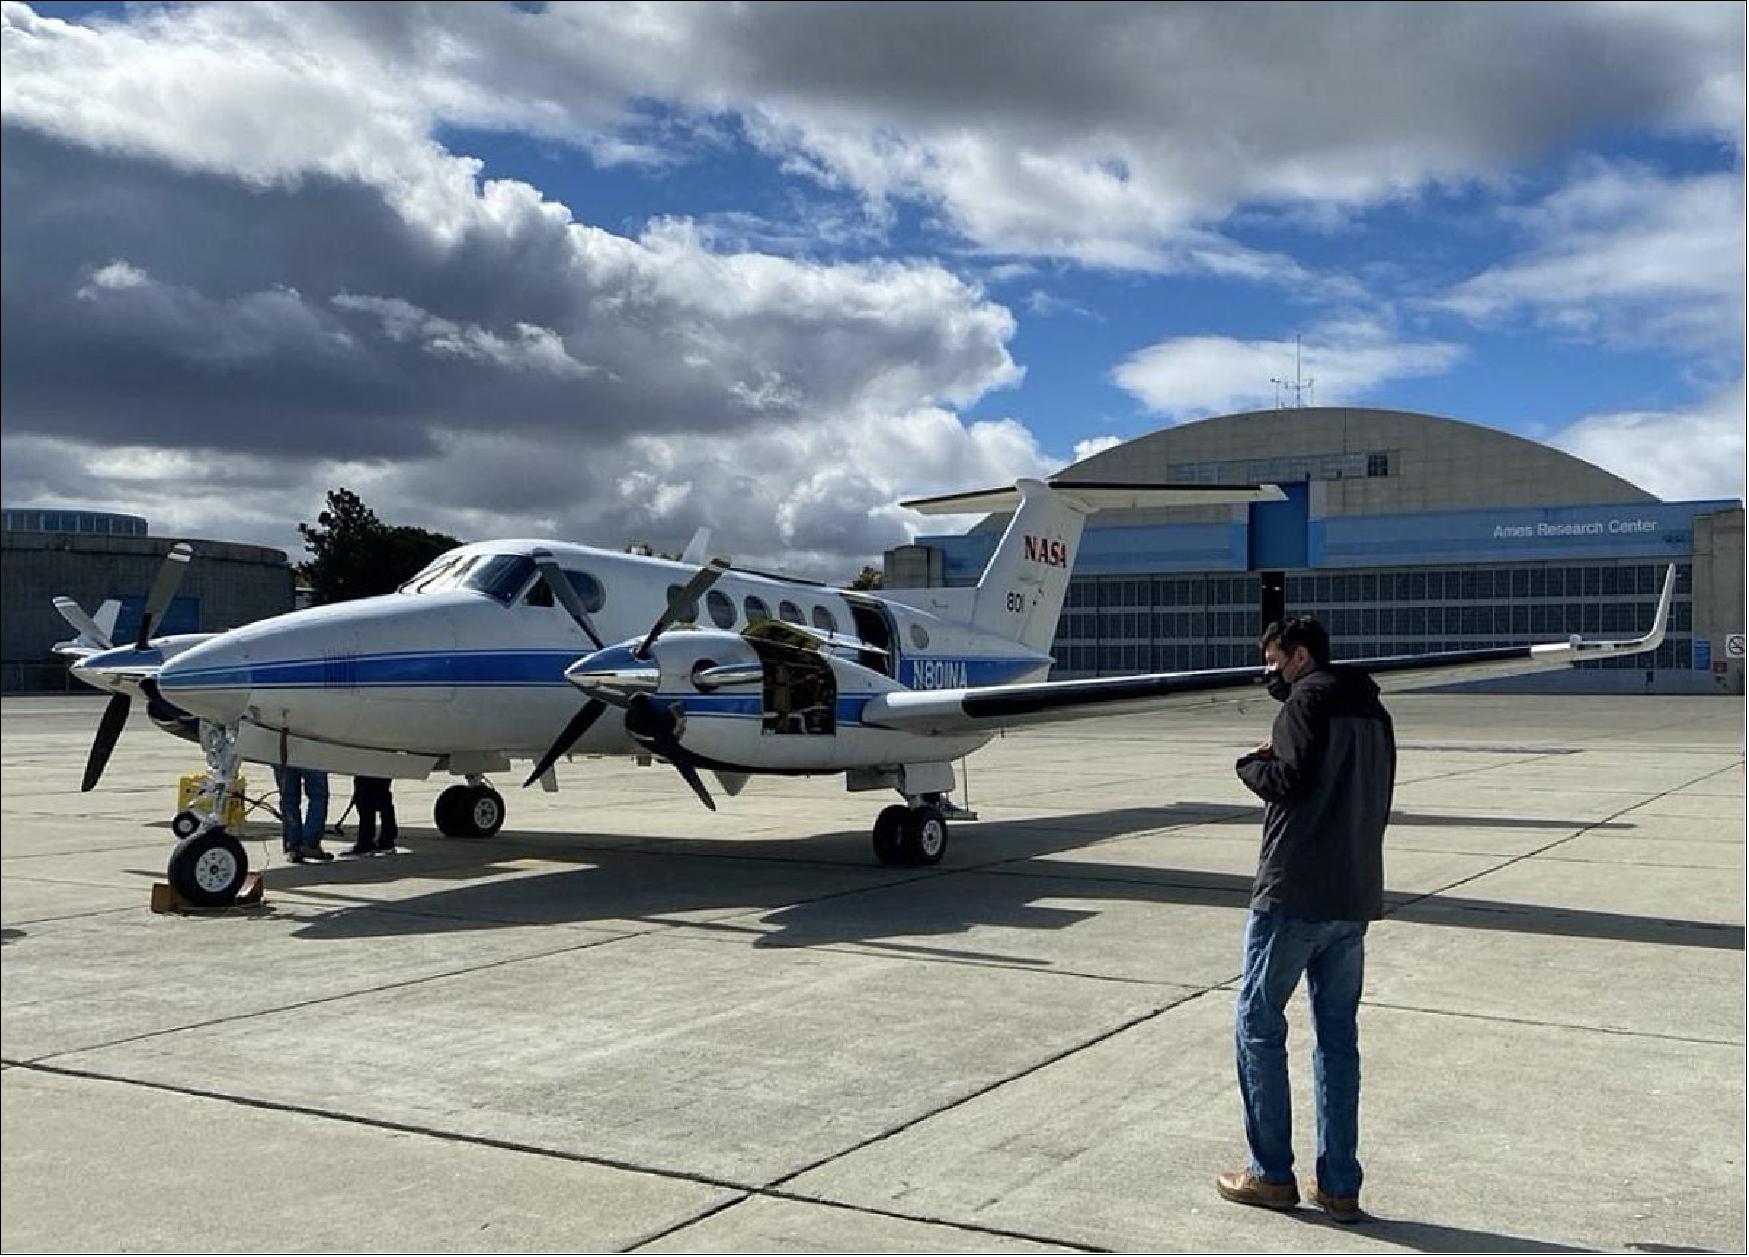 Figure 5: NASA King Air B200 aircraft on arrival at Ames Research Center carrying DopplerScatt and MOSES instruments (image credit: Erin Czech / NASA Ames Research Center)